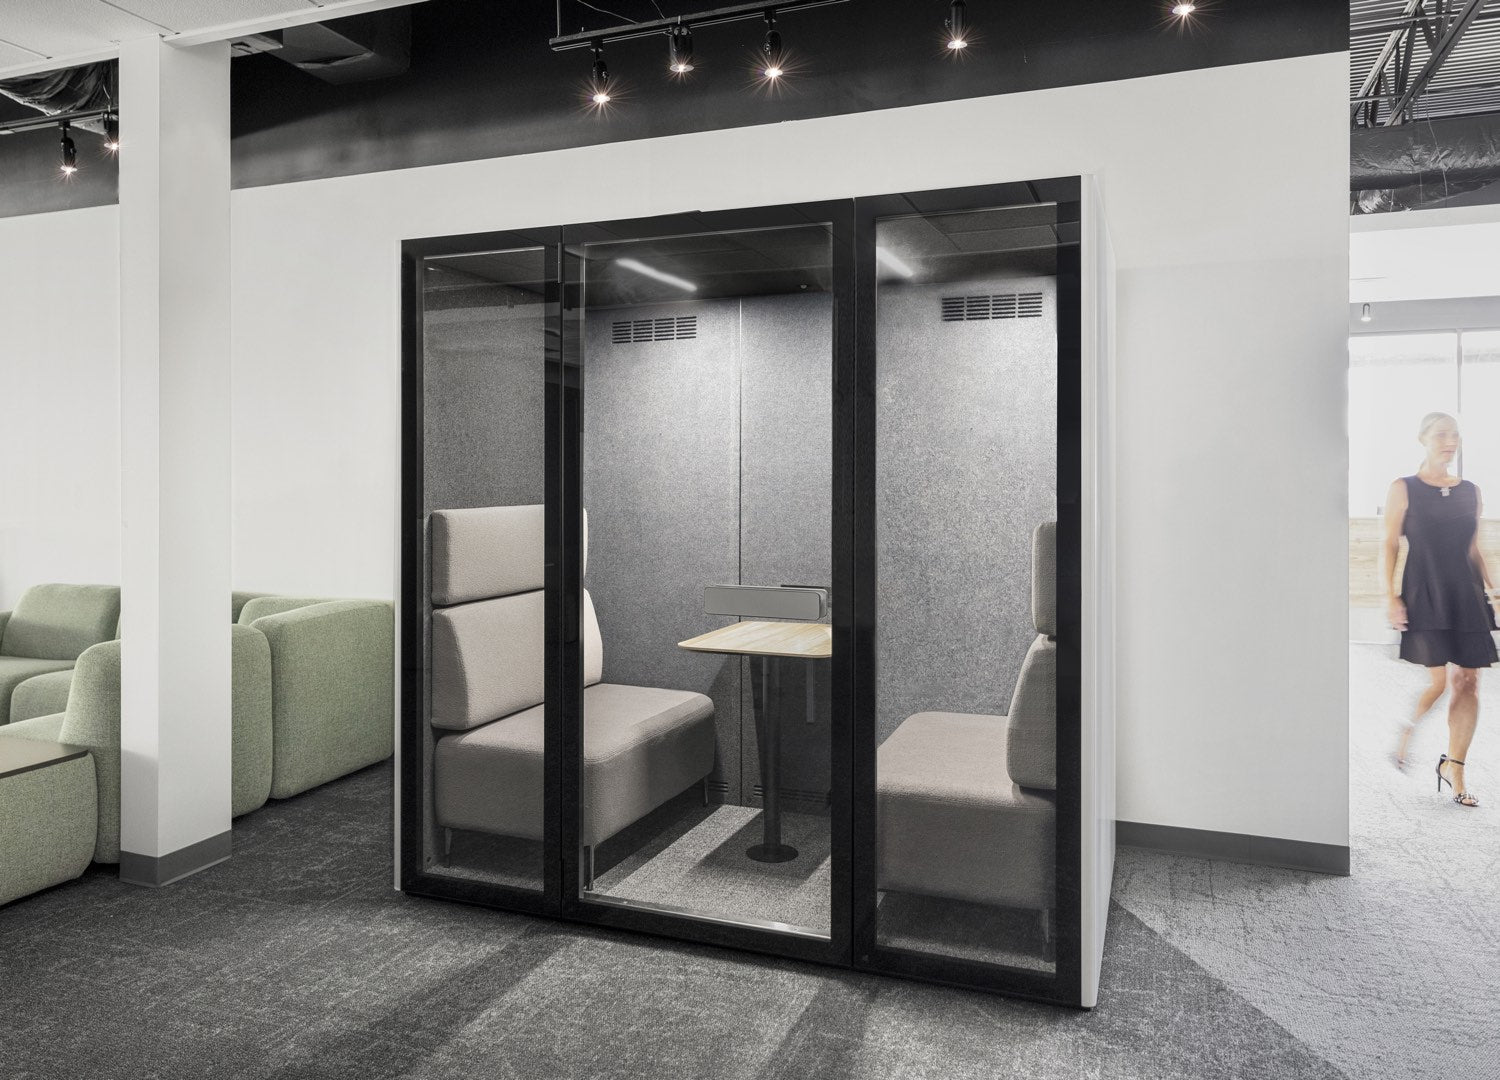 Office booths, Work booths